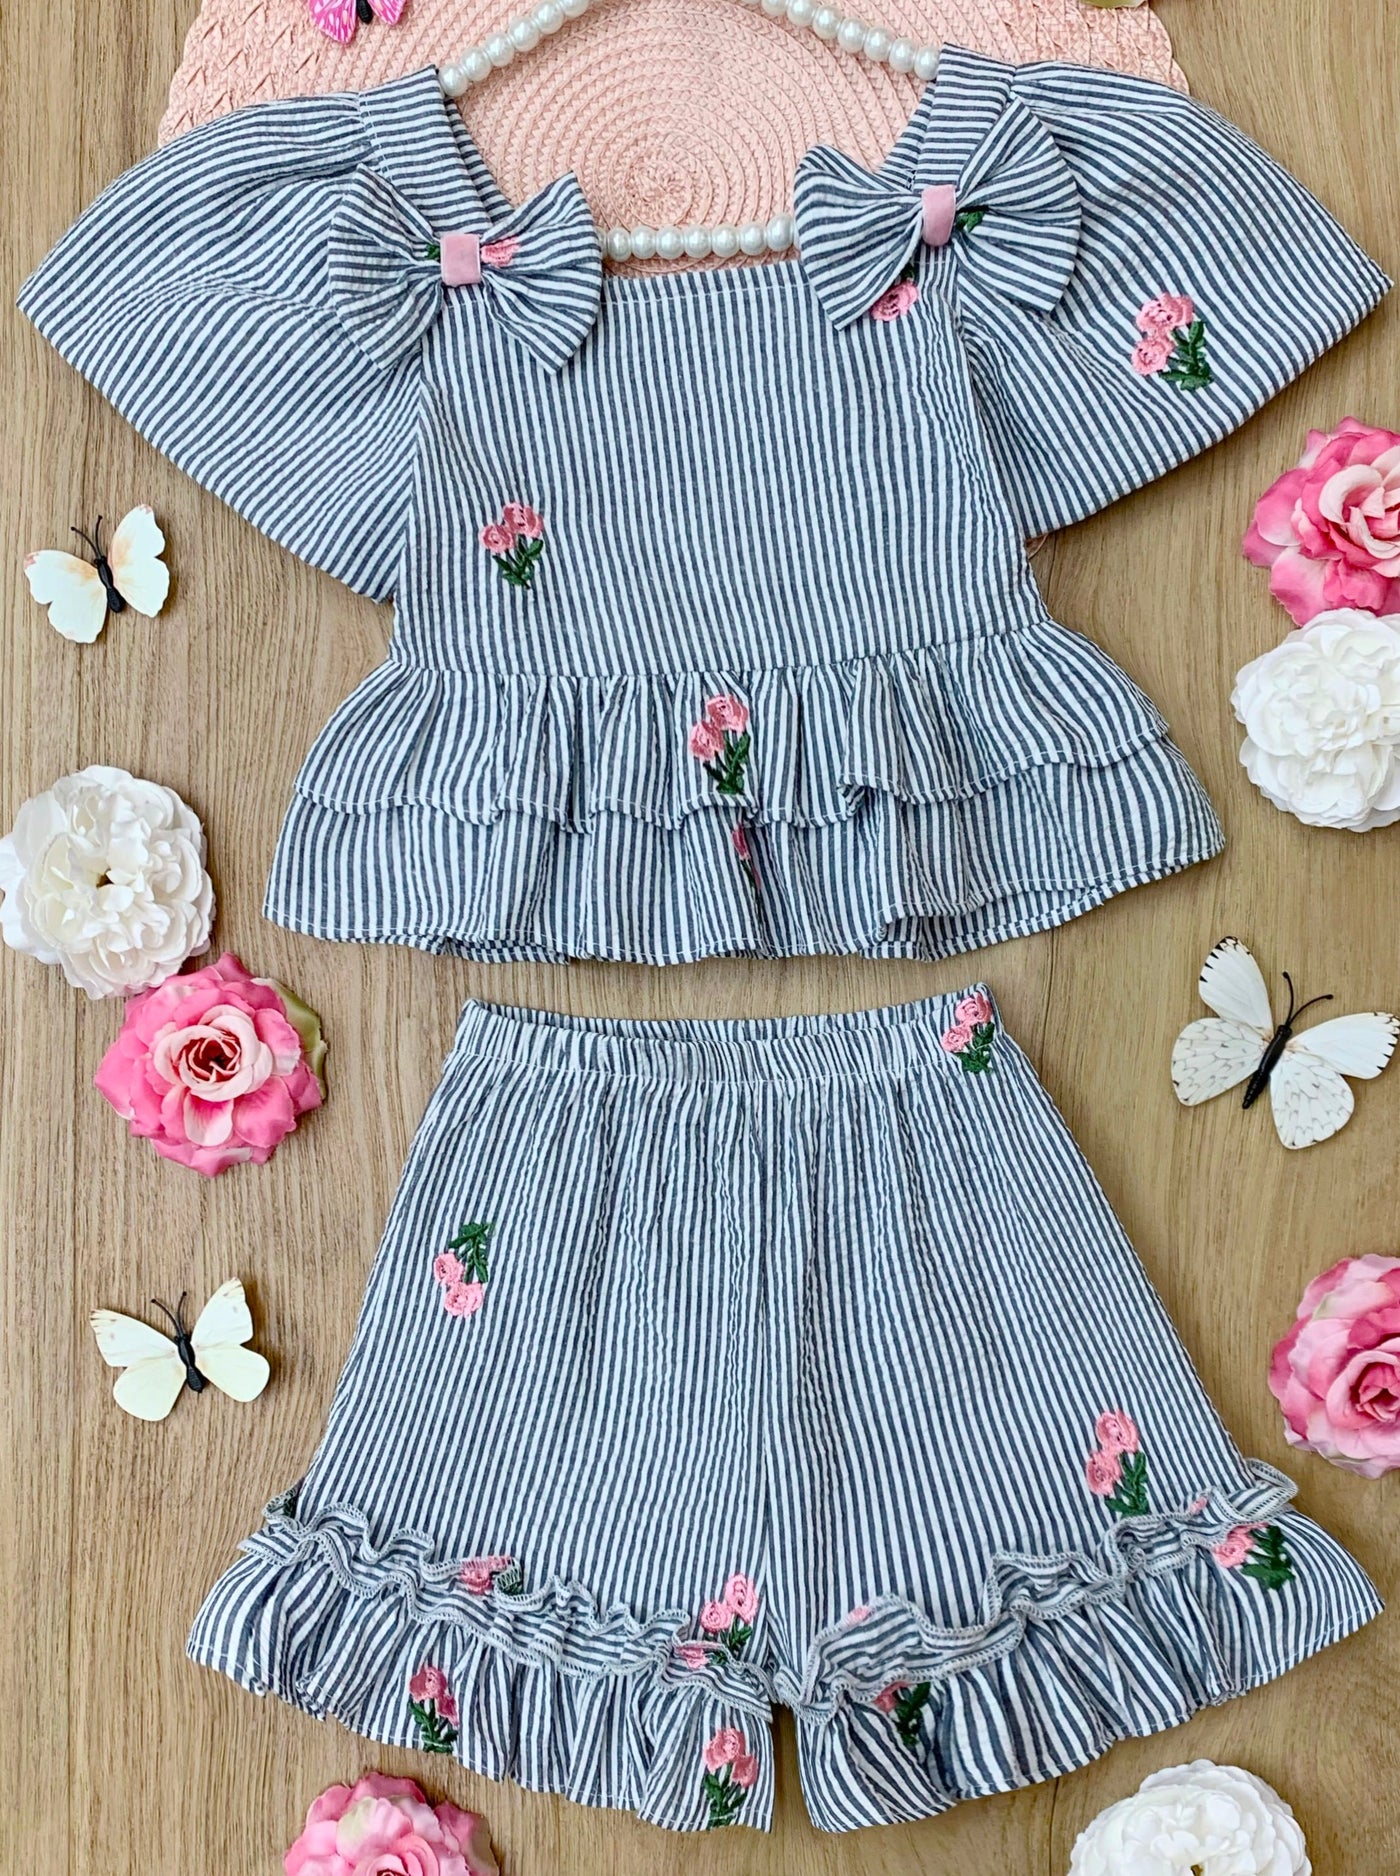 Mia Belle Girls Striped Top And Short Set | Girls Spring Outfits